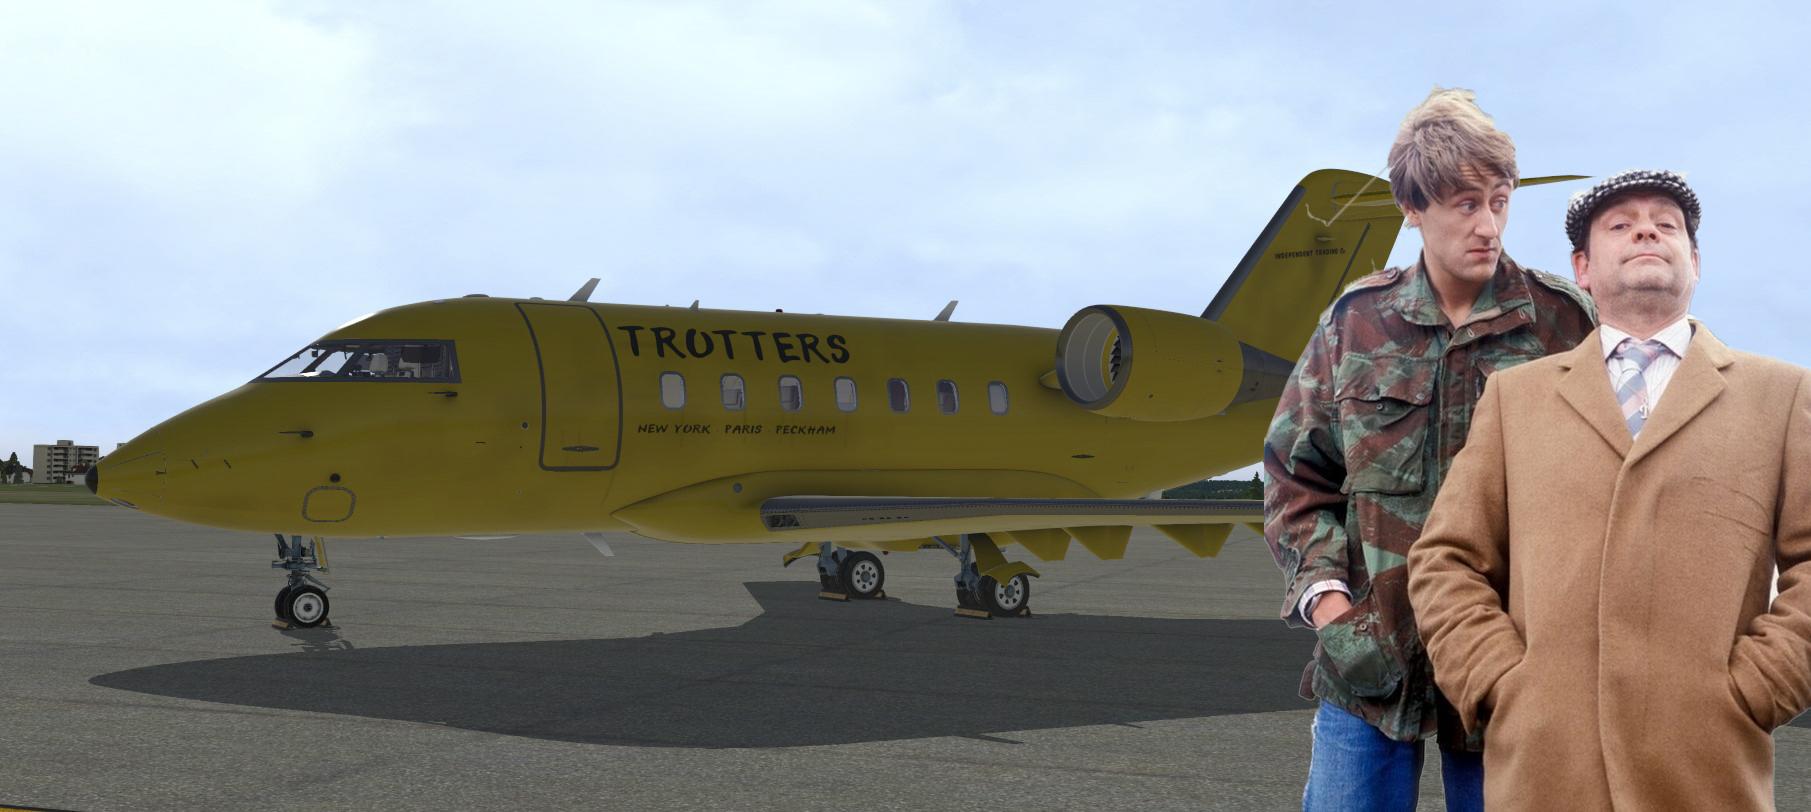 Trotter's Private Jet (Dirty)